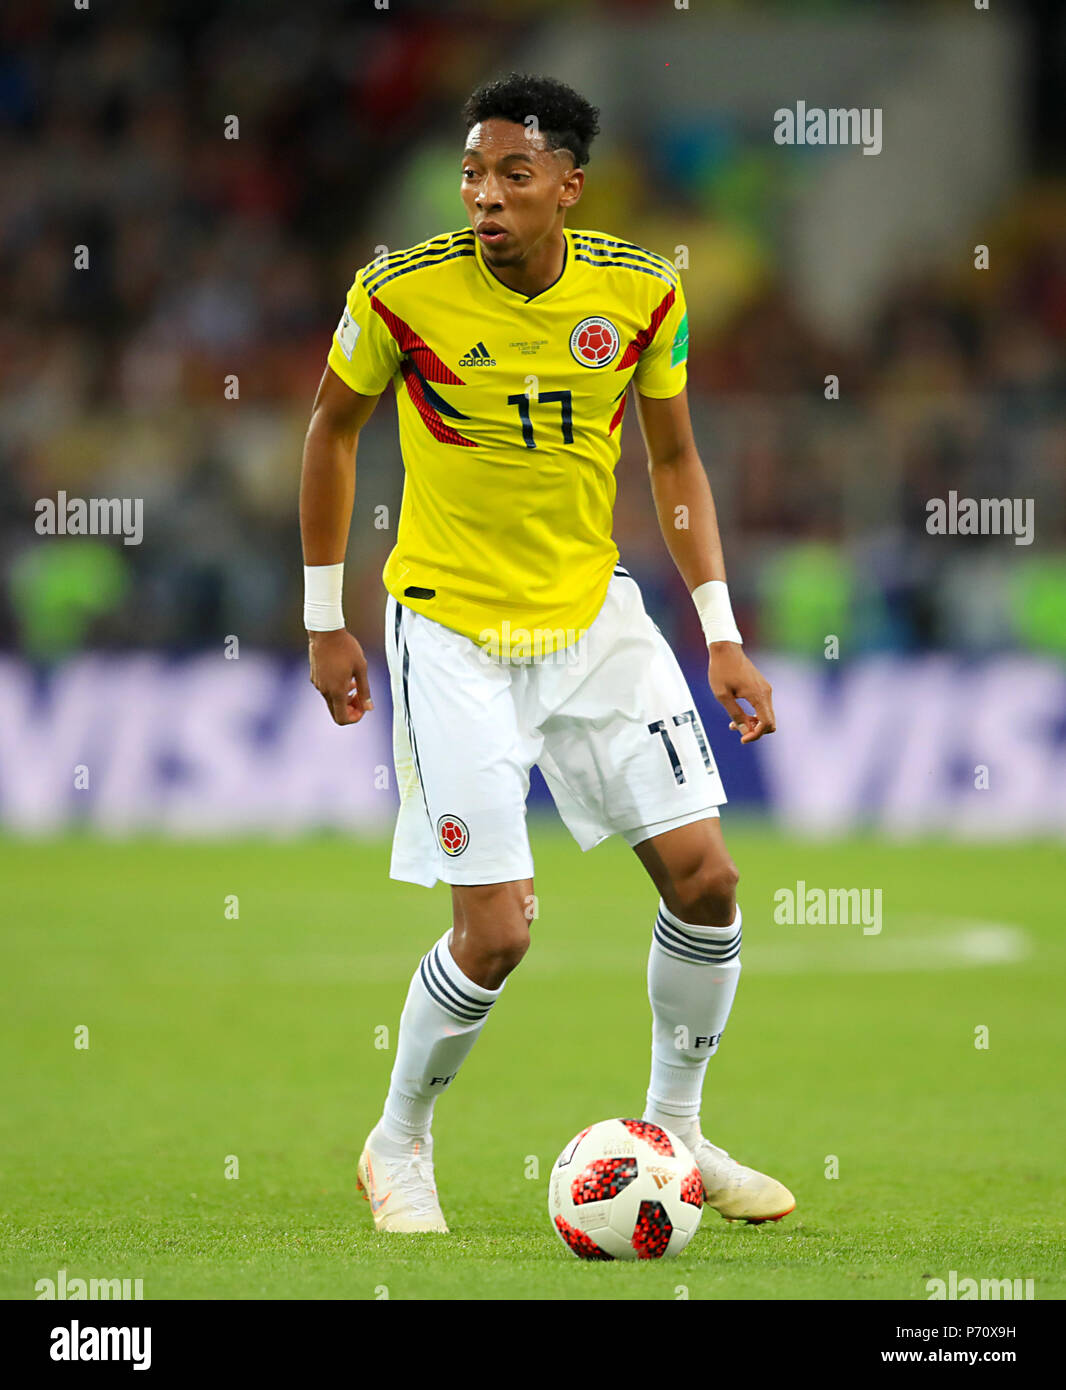 Colombia's Johan Mojica during the FIFA World Cup 2018, round of 16 match at the Spartak Stadium, Moscow. PRESS ASSOCIATION Photo. Picture date: Tuesday July 3, 2018. See PA story WORLDCUP England. Photo credit should read: Adam Davy/PA Wire. RESTRICTIONS: Editorial use only. No commercial use. No use with any unofficial 3rd party logos. No manipulation of images. No video emulation Stock Photo